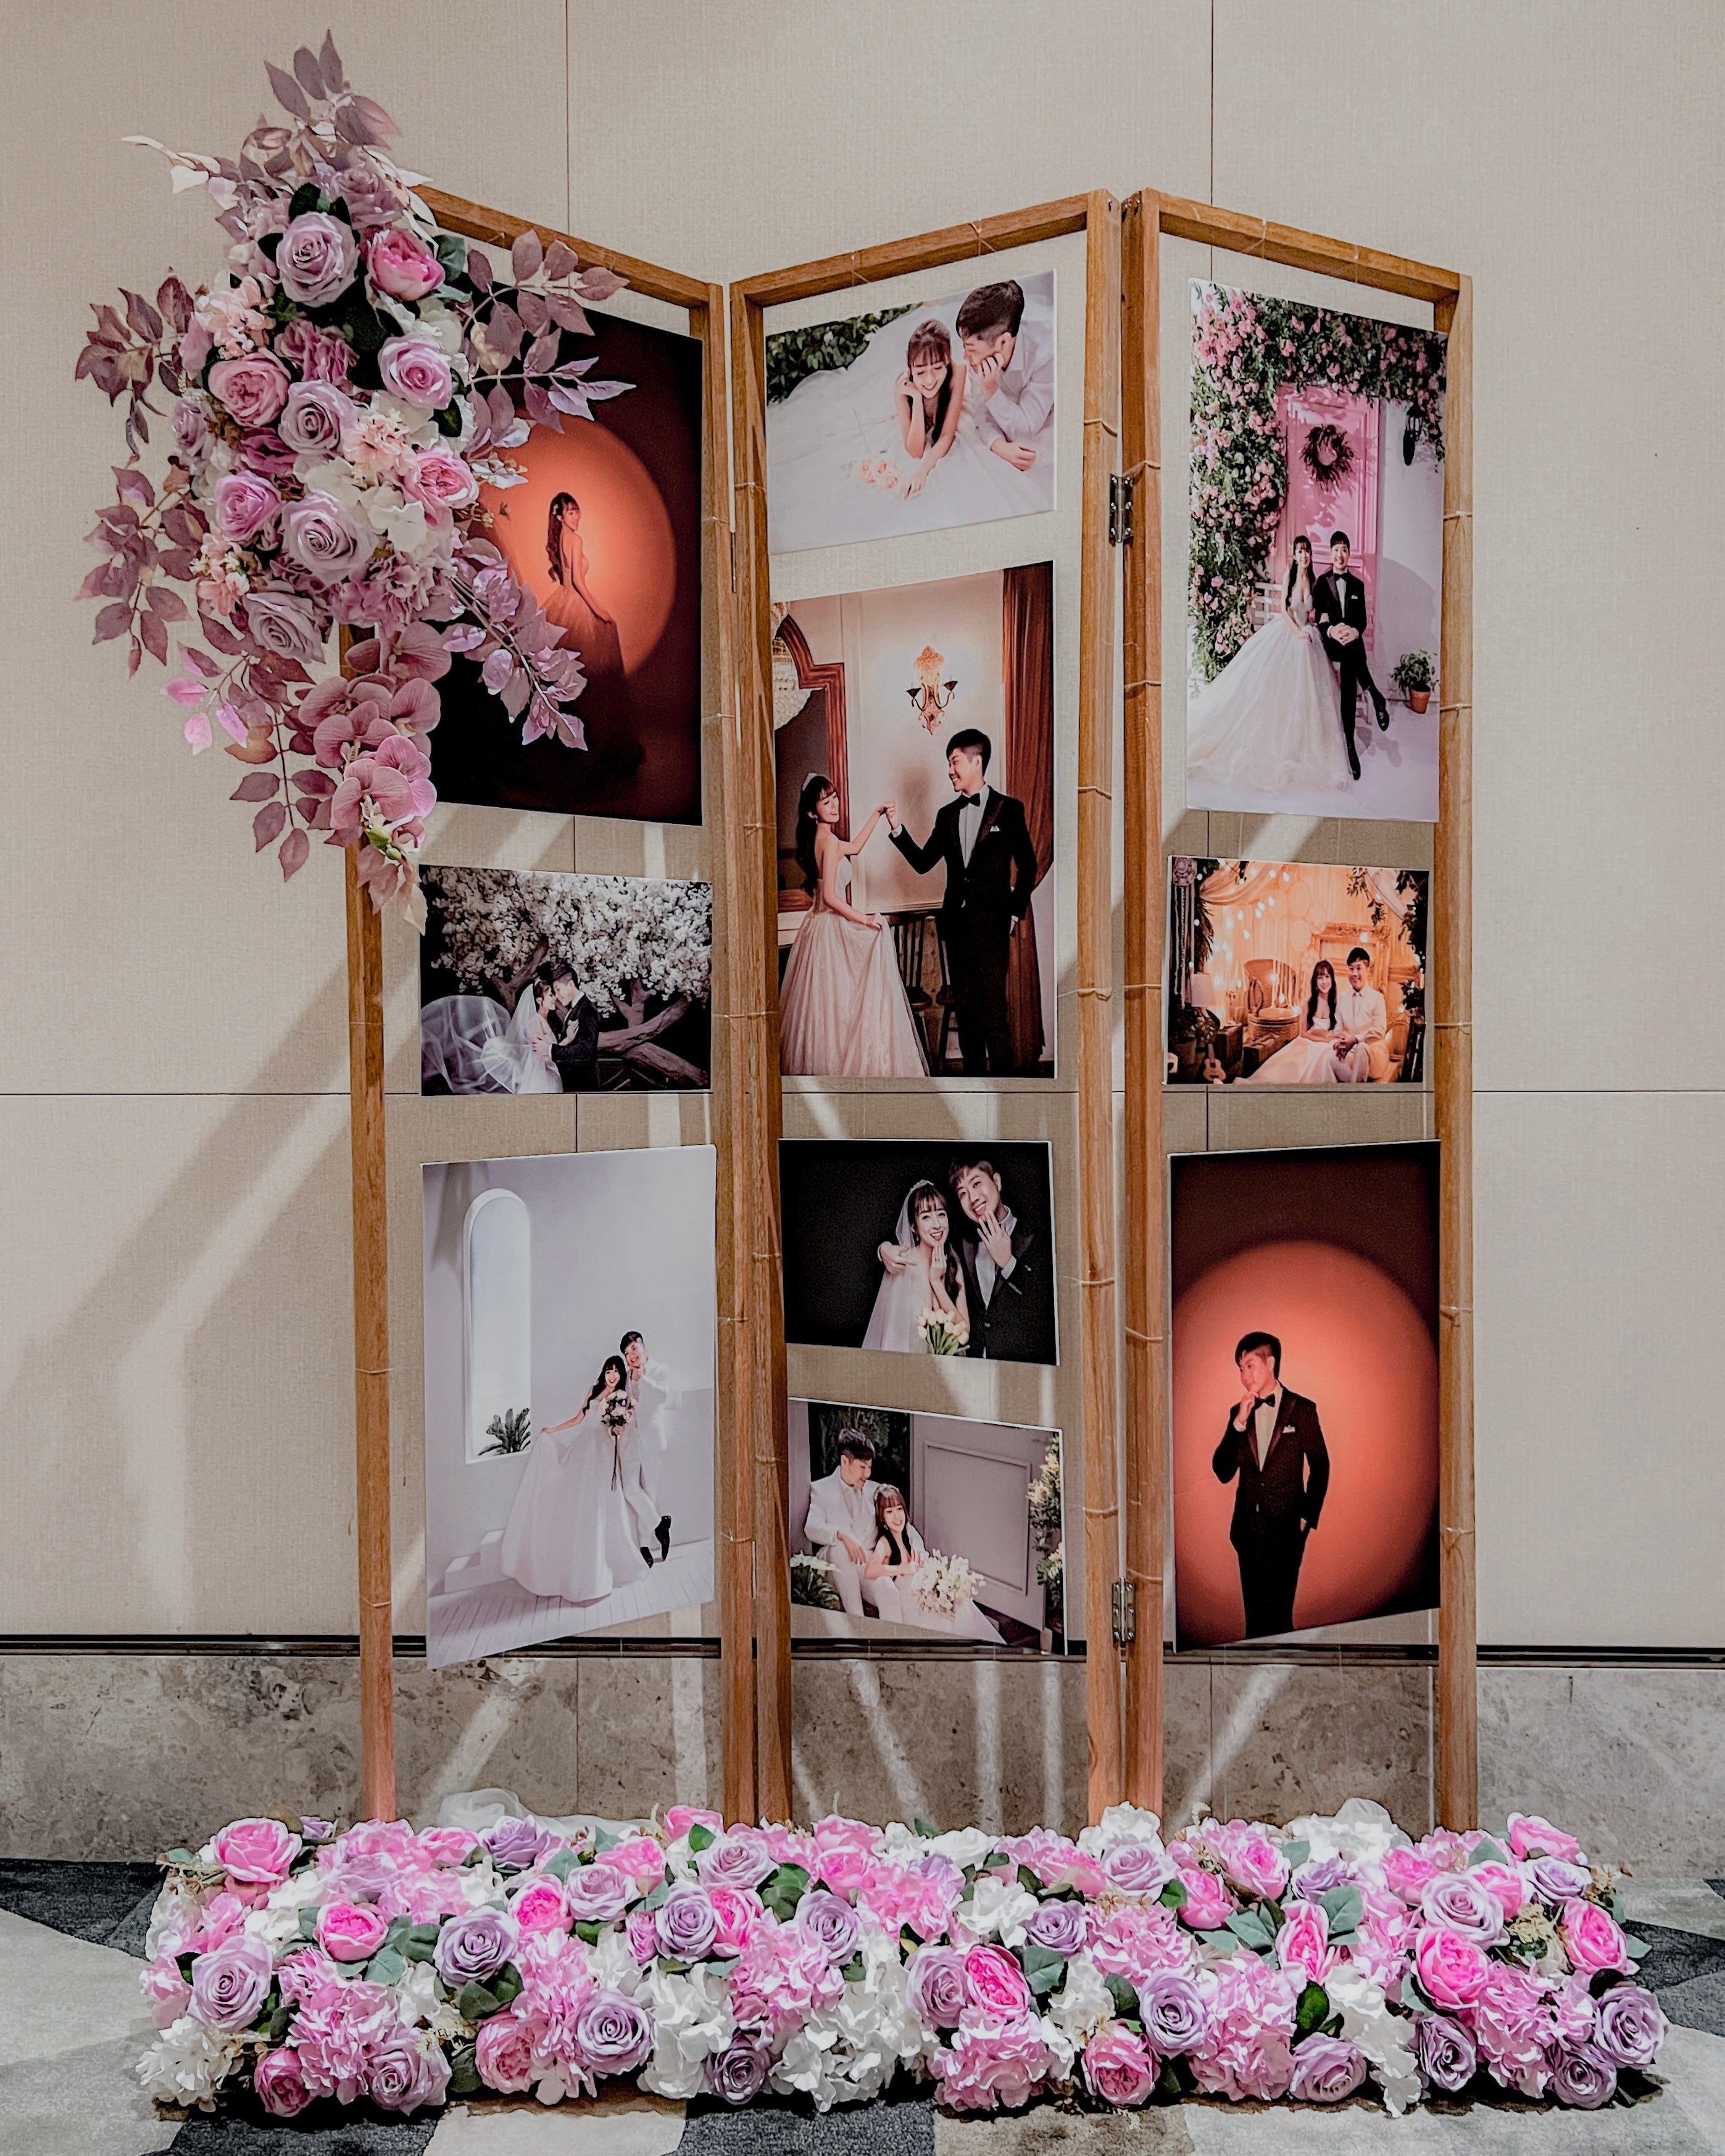 Affordable Wedding Reception Decor in Singapore - Rustic Photo Gallery with Purple/Lilac & White Florals (Venue: Sofitel Singapore City Centre)